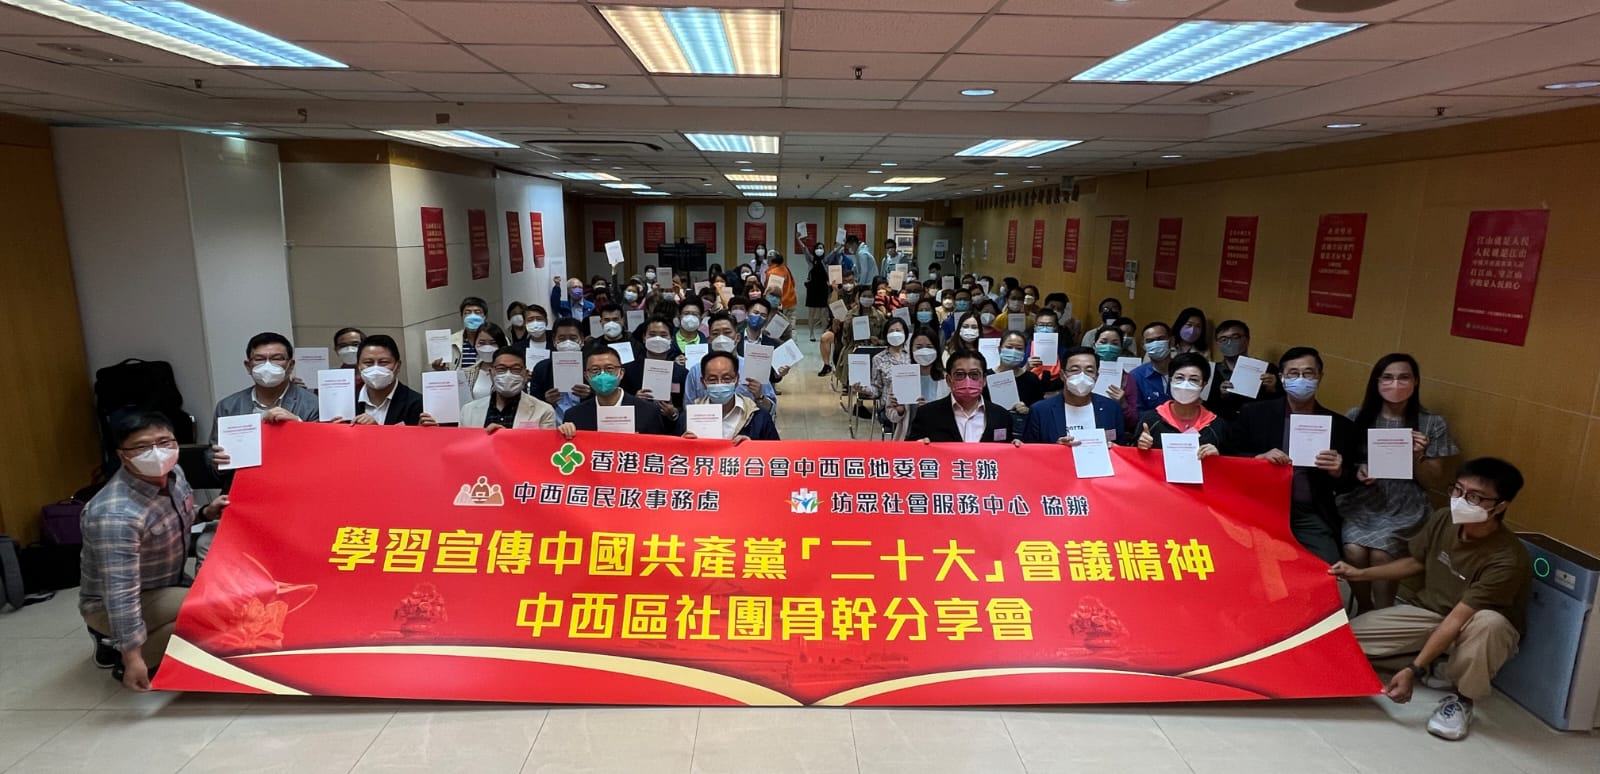 The Central and Western District Office, together with the Hong Kong Island Federation Central and Western District Committee and the Fong Chung Social Service Centre, held a session on "Spirit of the 20th National Congress of the CPC" in Sheung Wan on November 5. Photo shows guests and participants at the session.